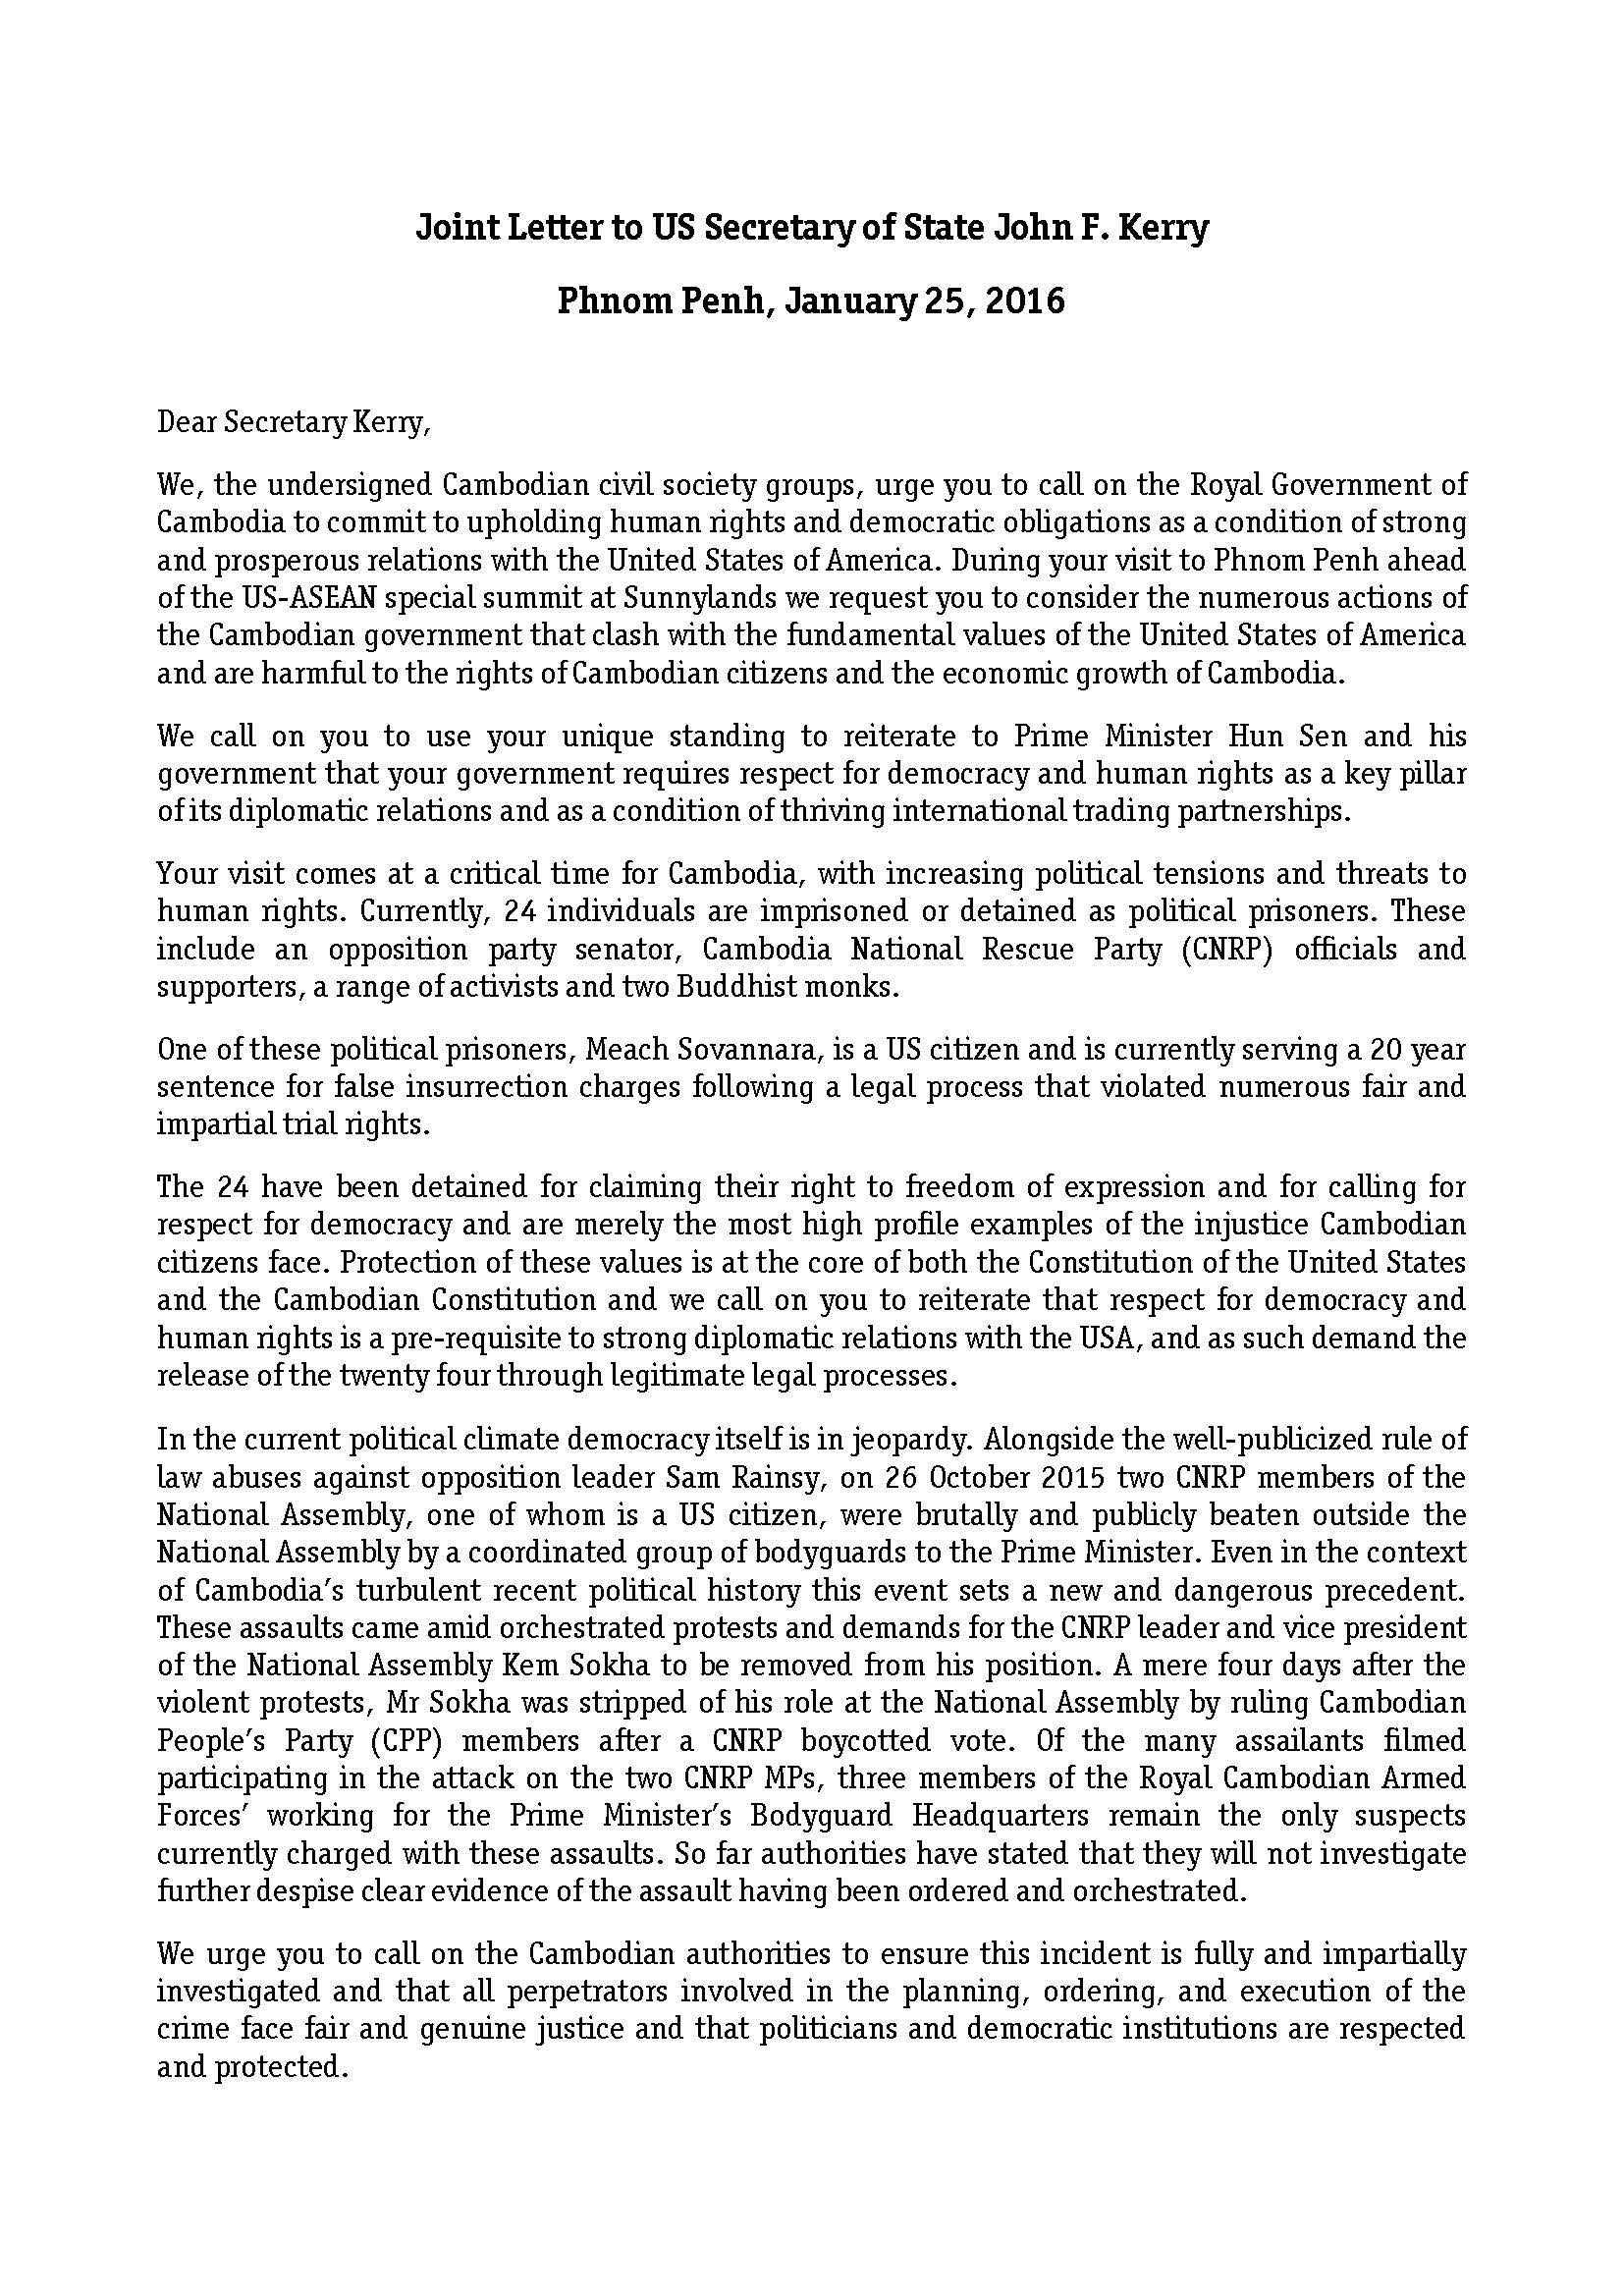 Kerry Phnom Penh letter endorsed by Union_Community and NGO_Page_1